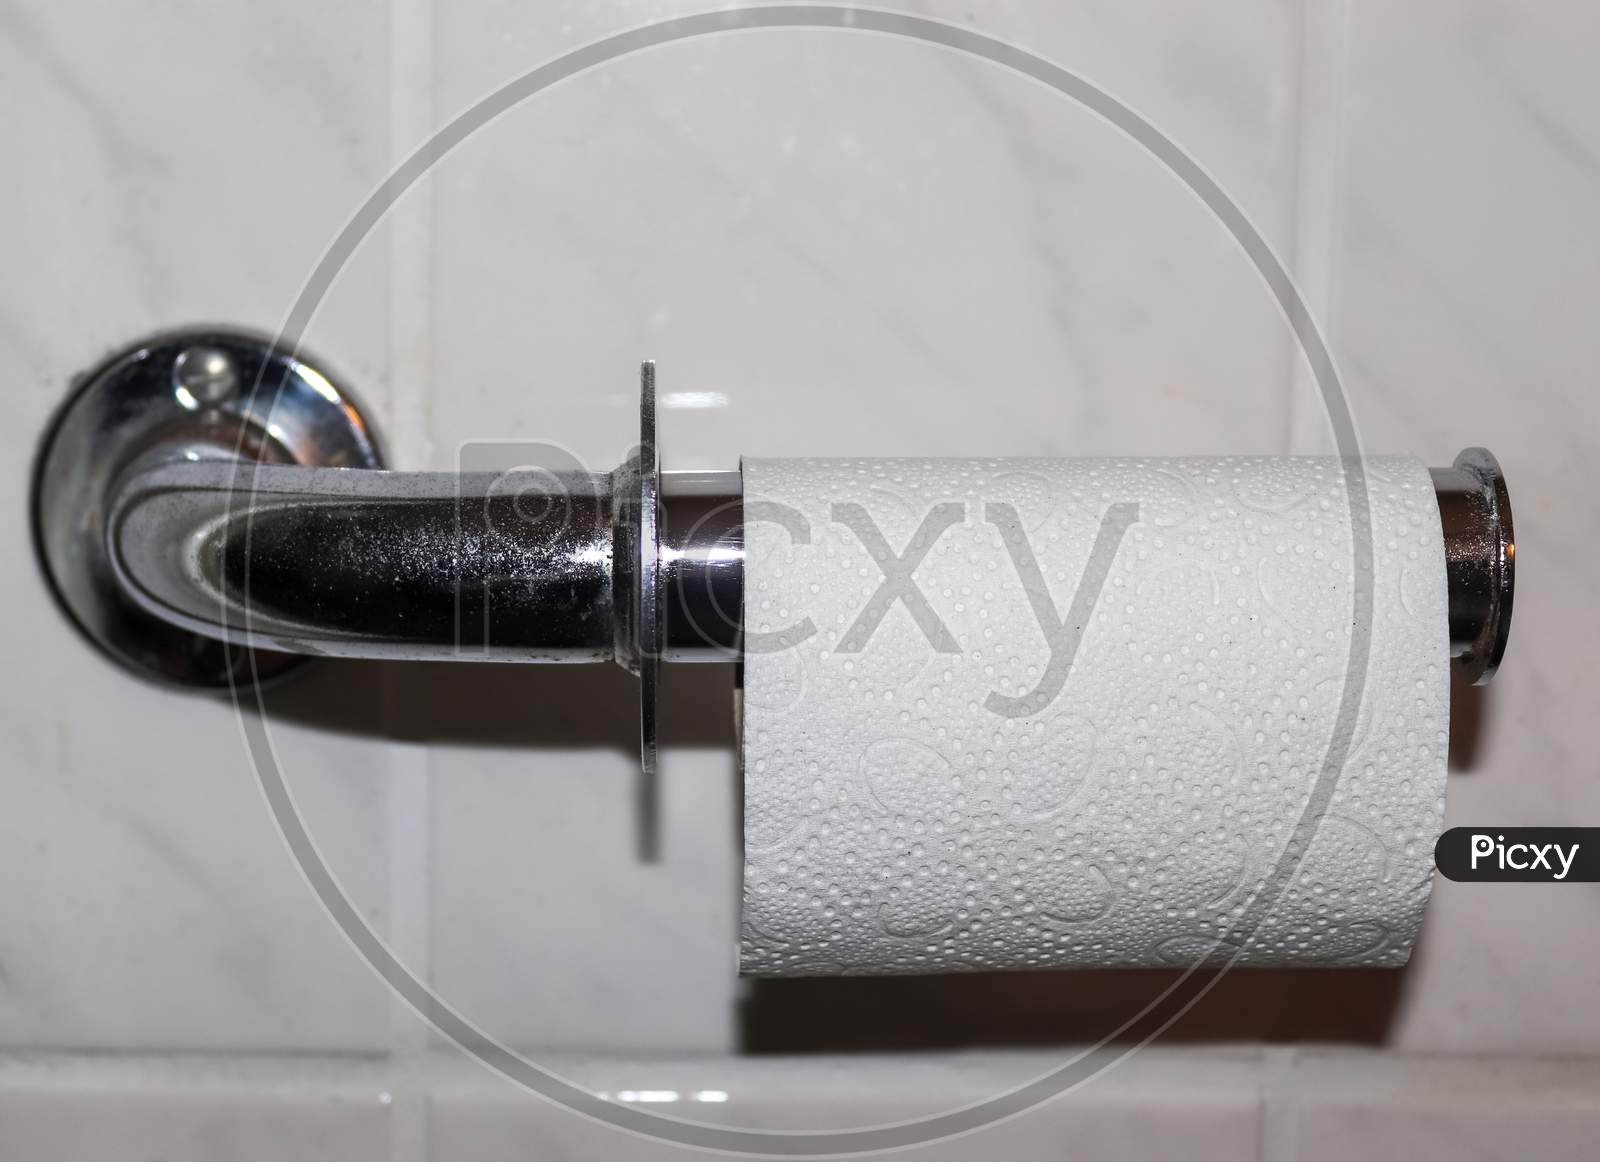 A White Roll Of Soft Toilet Paper Neatly Hanging On A Modern Chrome Holder On A Light Bathroom Wall